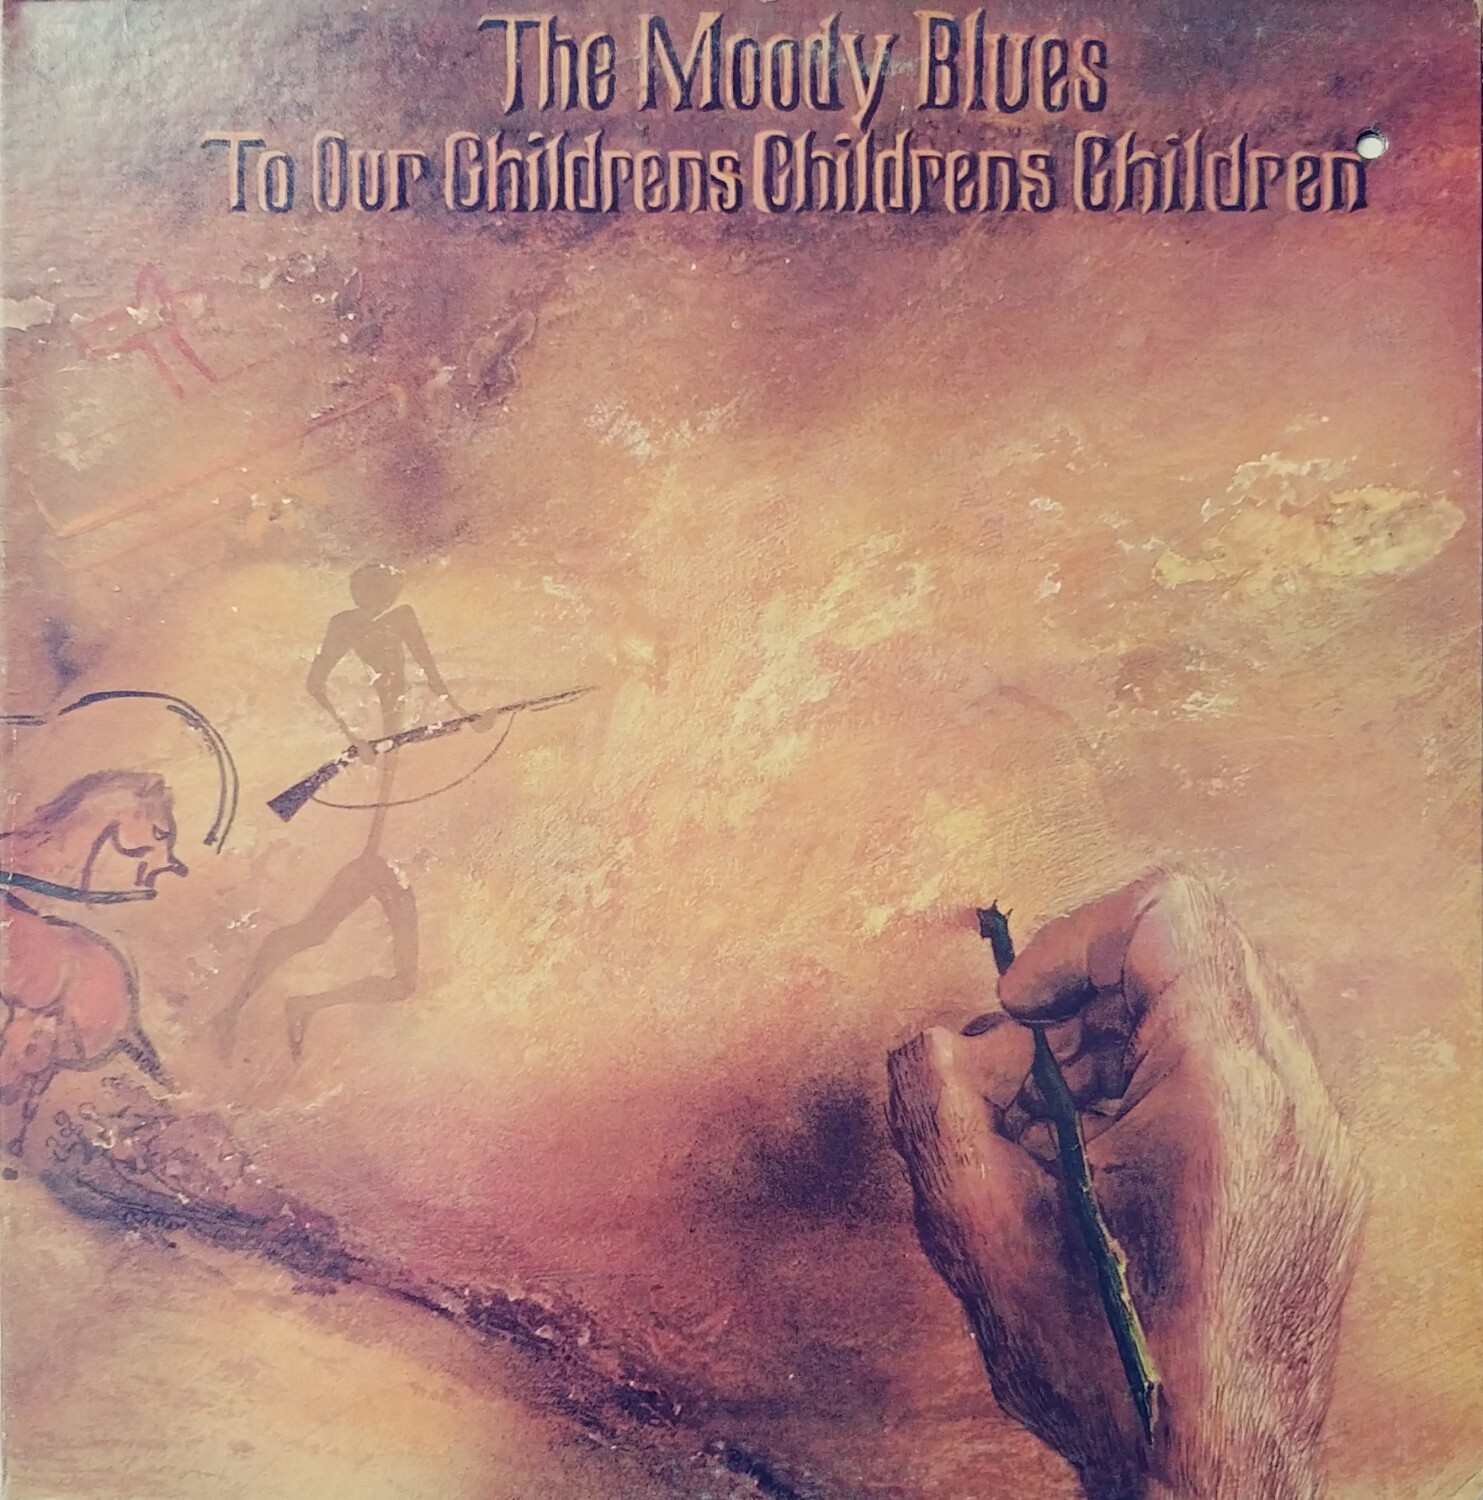 The Moody Blues - To our children's children's children